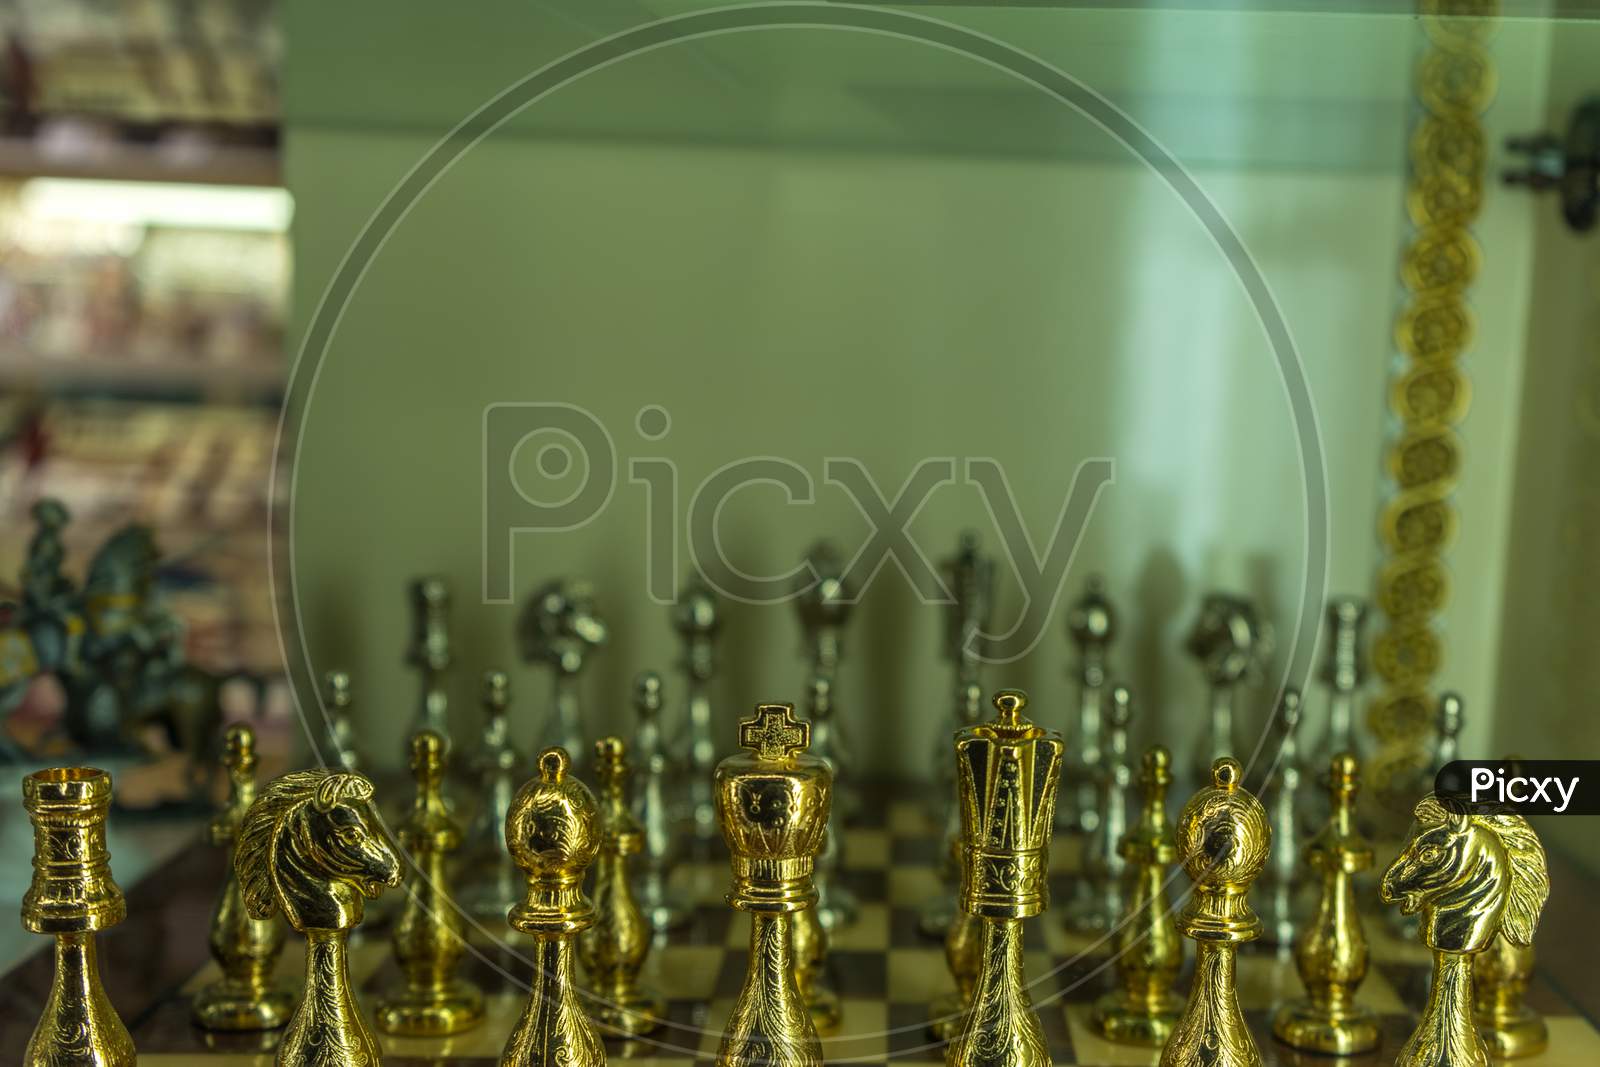 Chess Pieces Artifacts On Display In A Shop In Venice, Italy